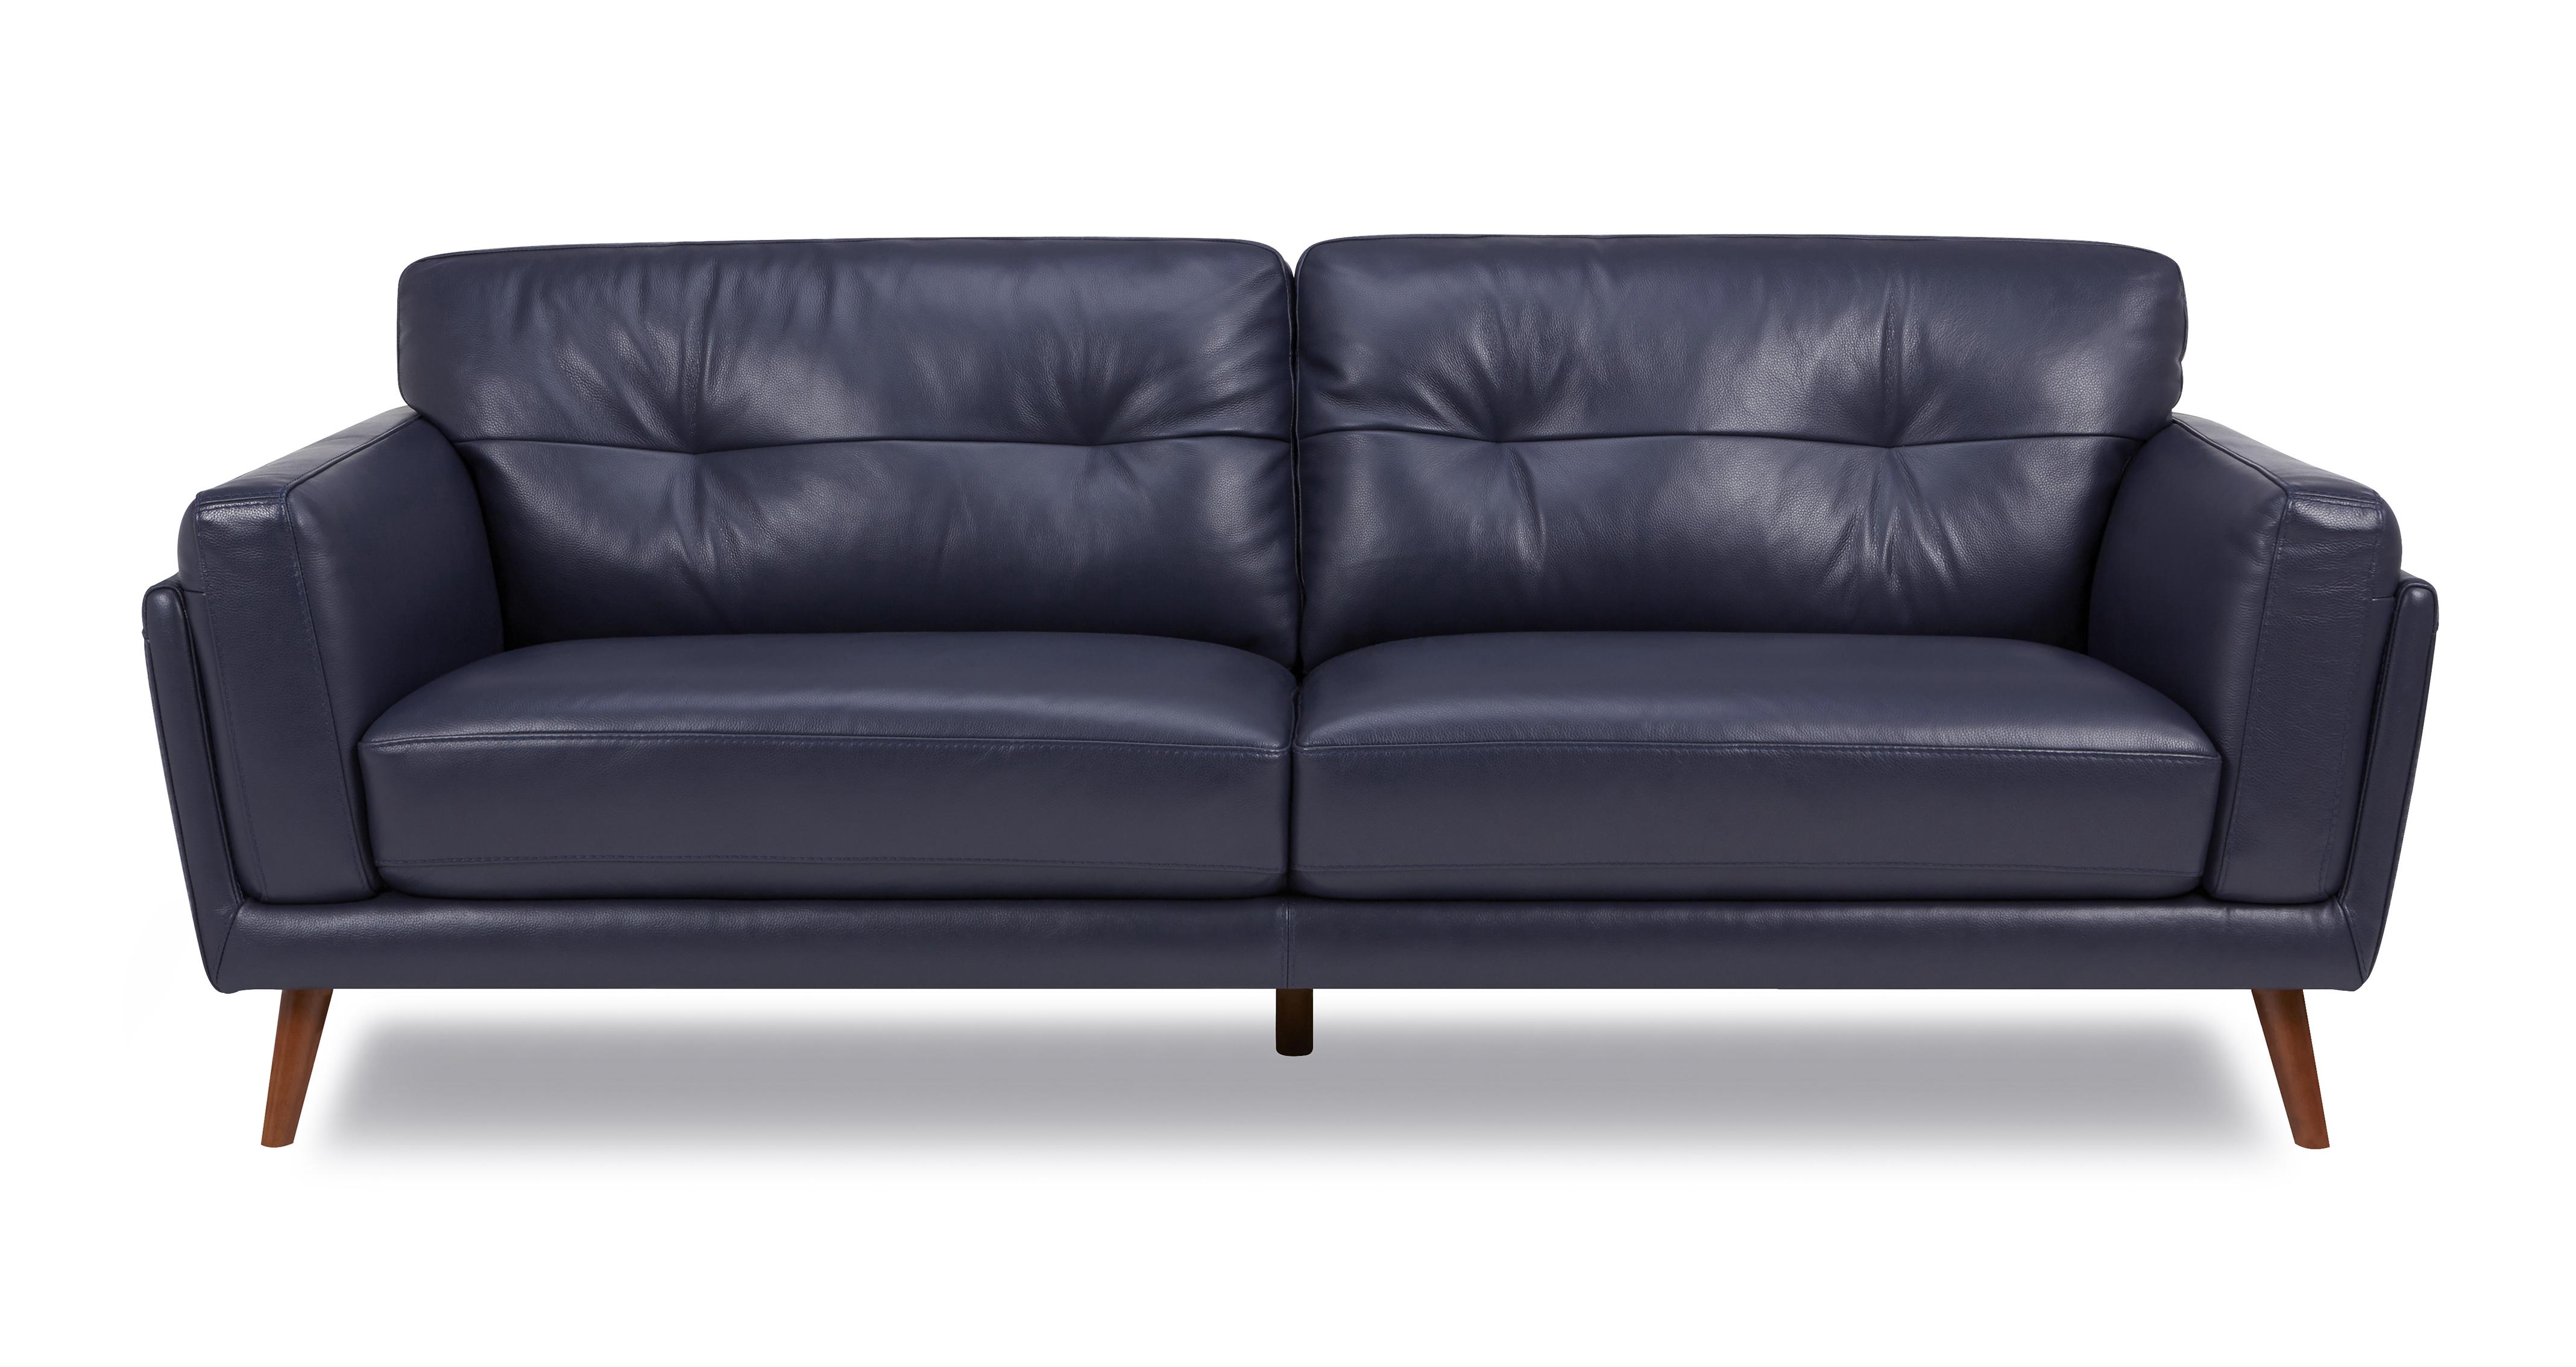 DFS Hackney - Graphite  Leather sofa living room, Modern leather